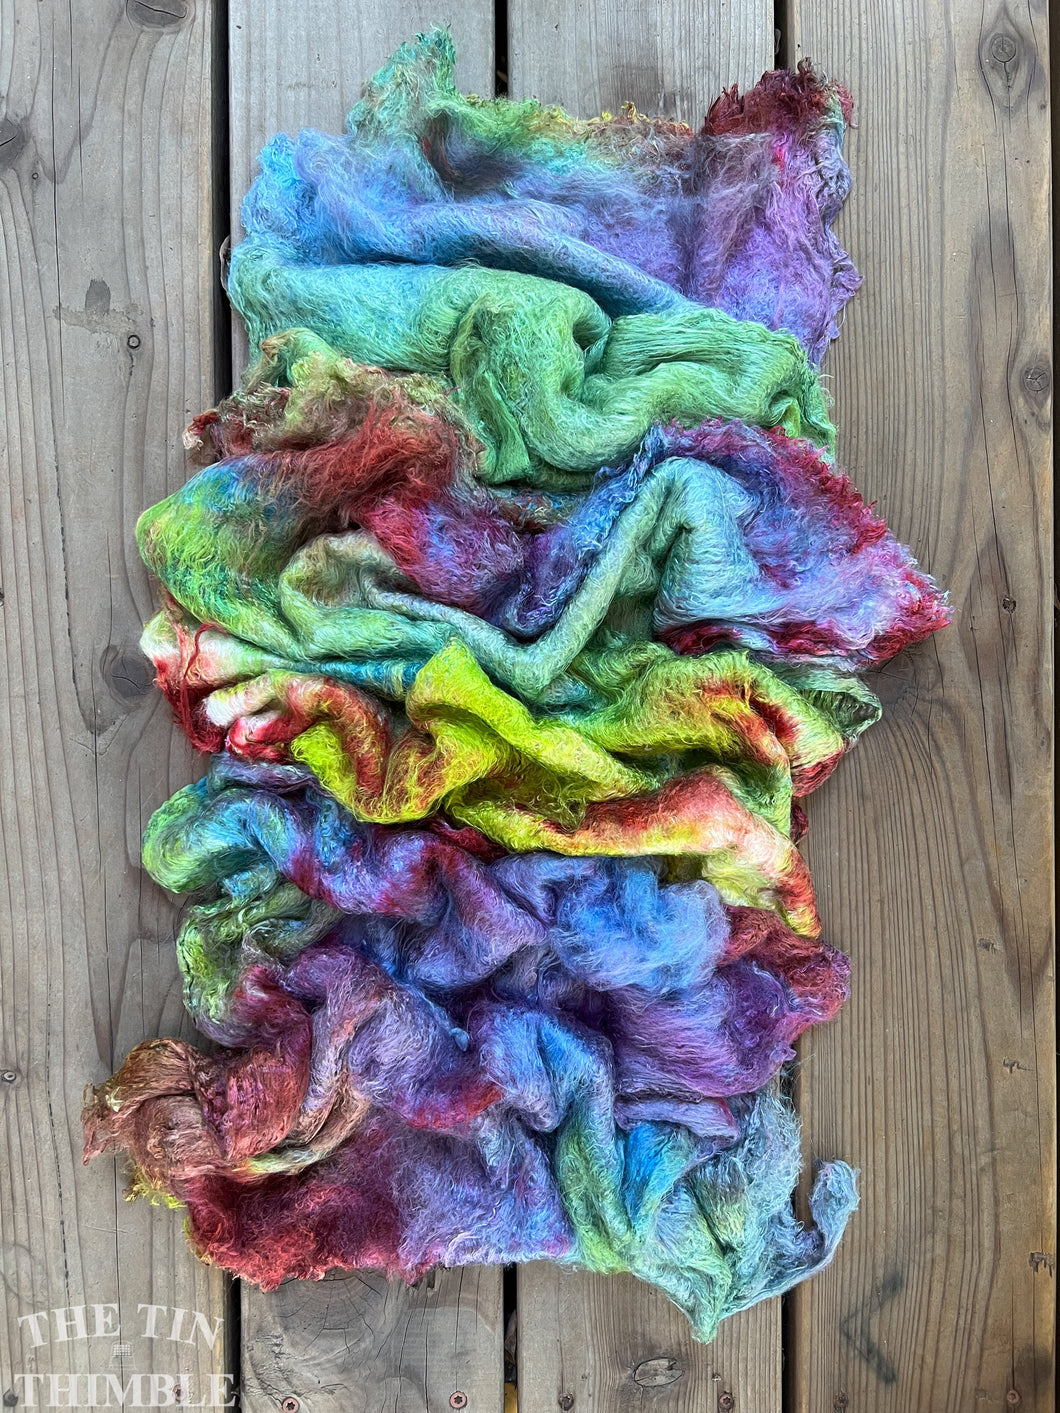 Hand Dyed Silk Mulberry Lap Fiber for Spinning or Felting in 'Iris Patch' / Blue, Burgundy and Green 100% Silk Laps Similar to Silk Hankies